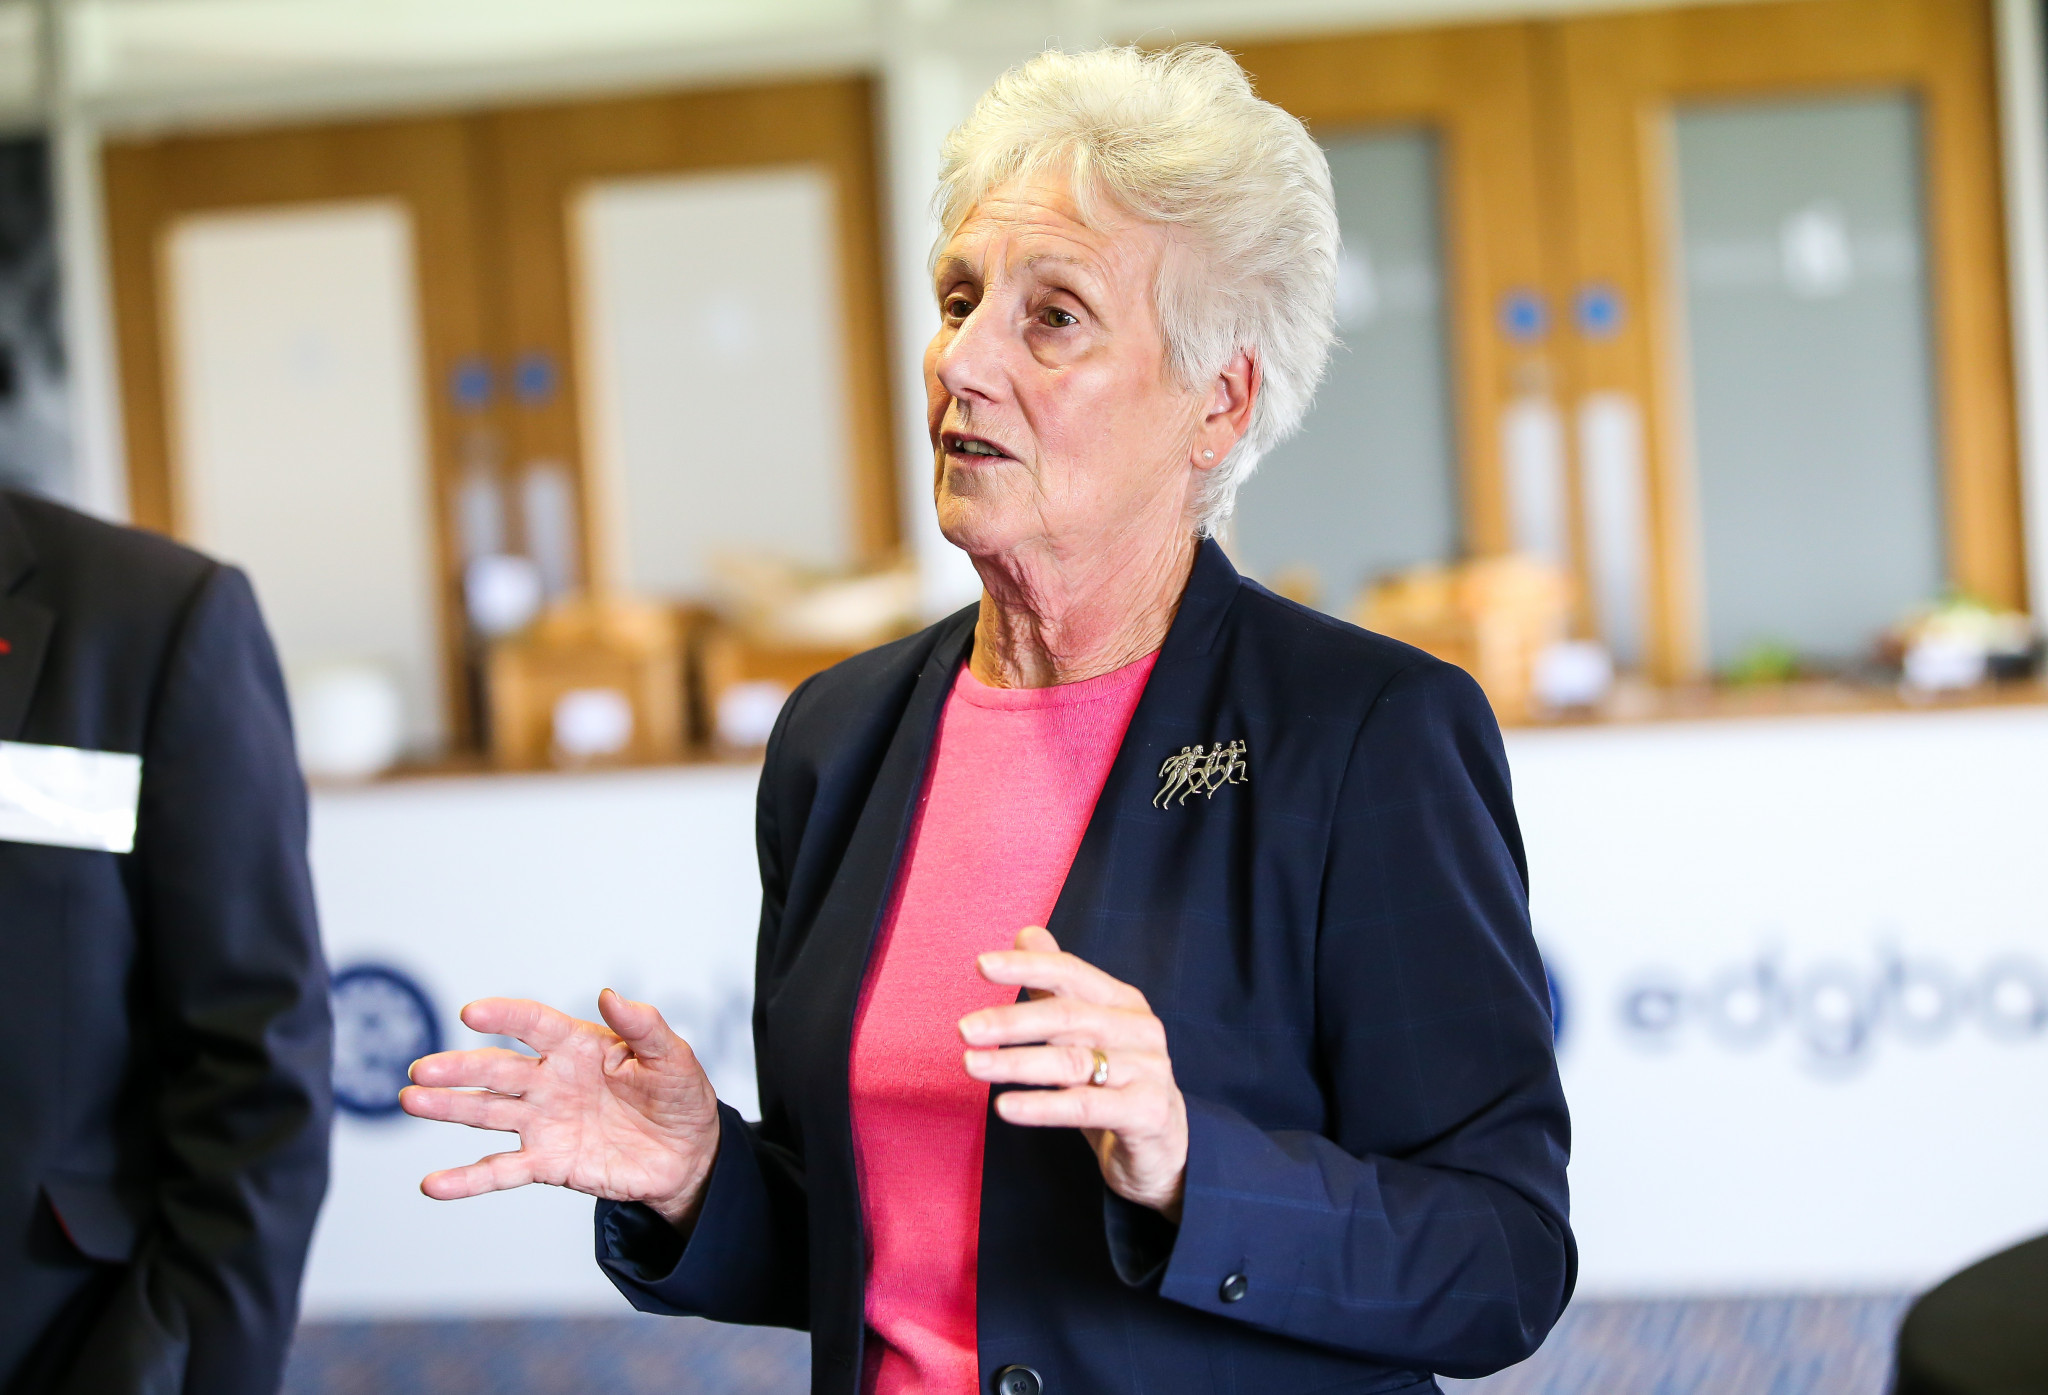 CGF President Dame Louise Martin has said the Games need to 